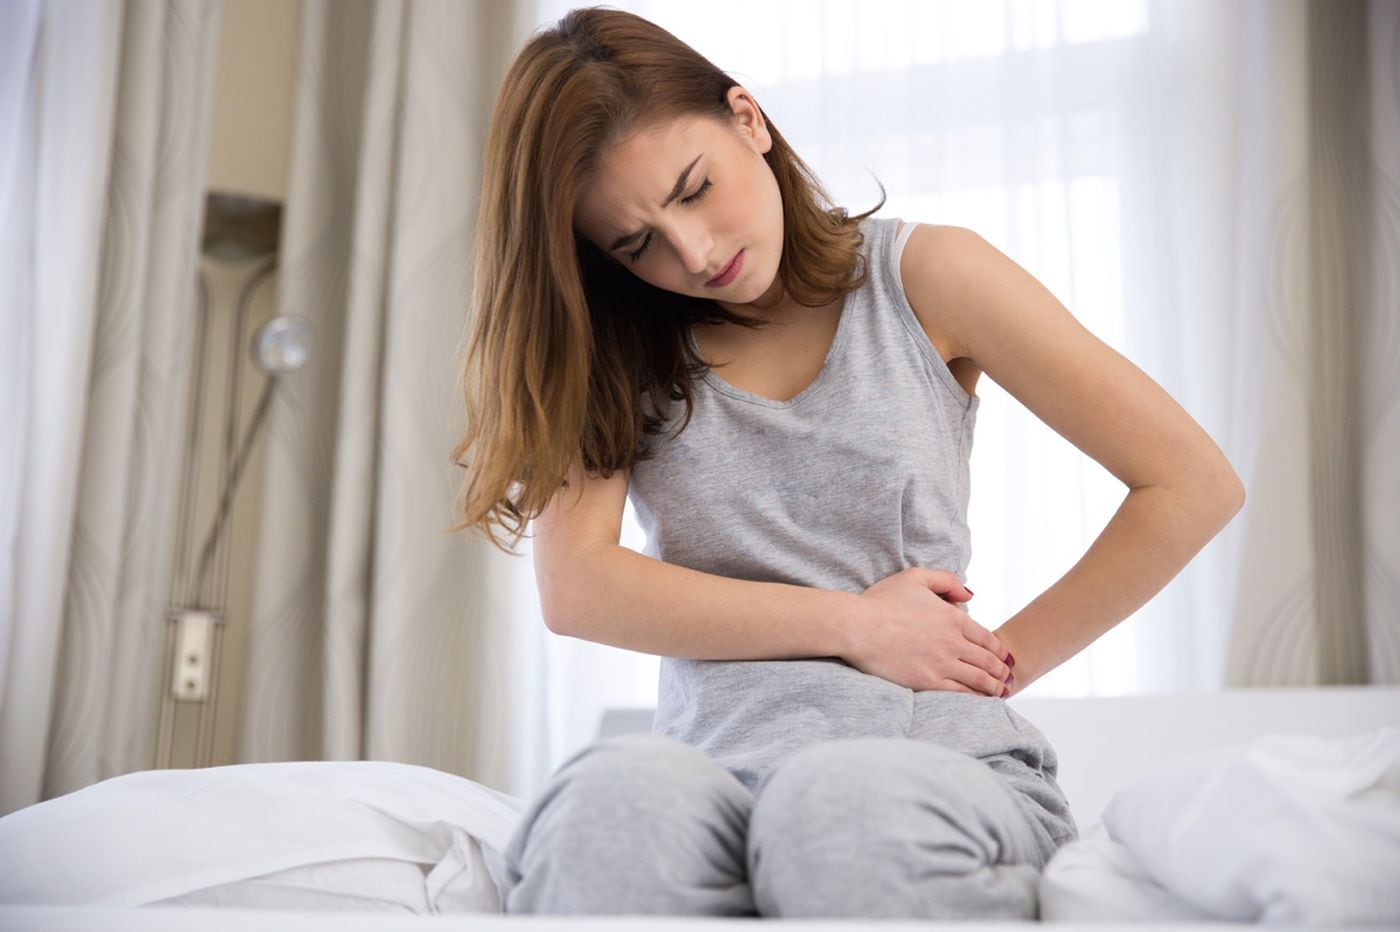 Medical mystery: What caused teen's severe stomach pain?